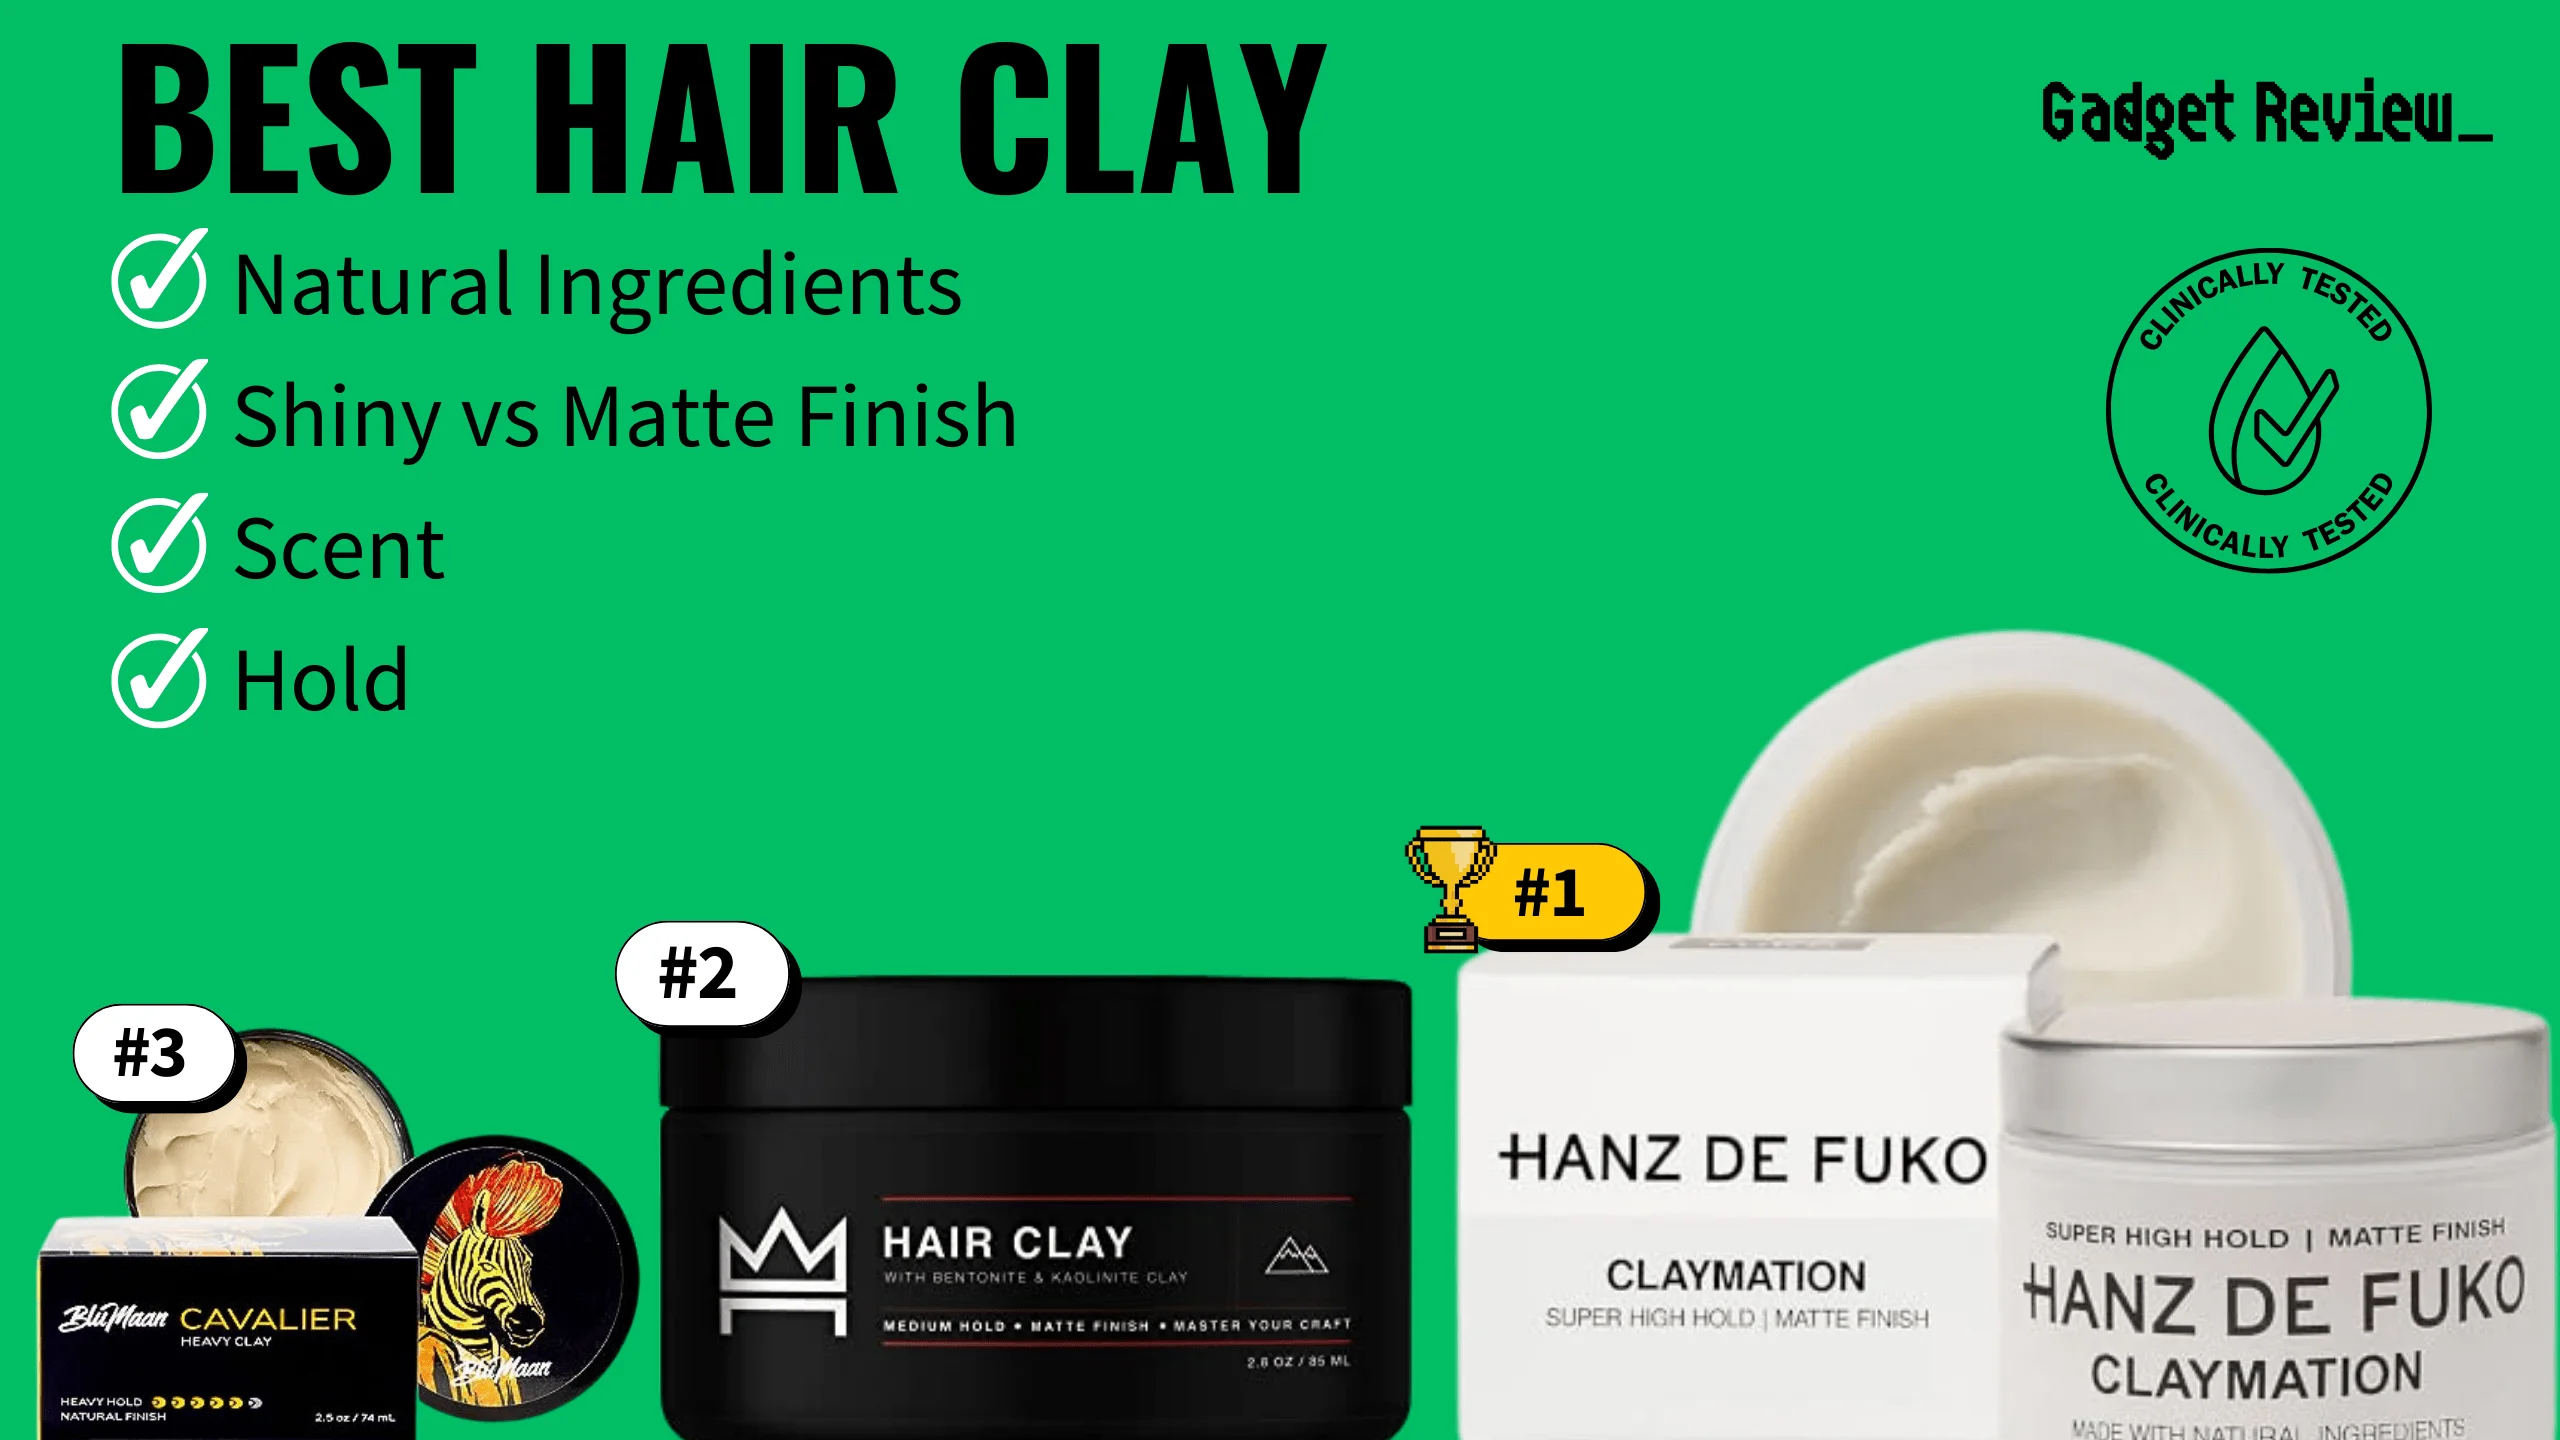 best hair clay featured image that shows the top three best bathroom essential models